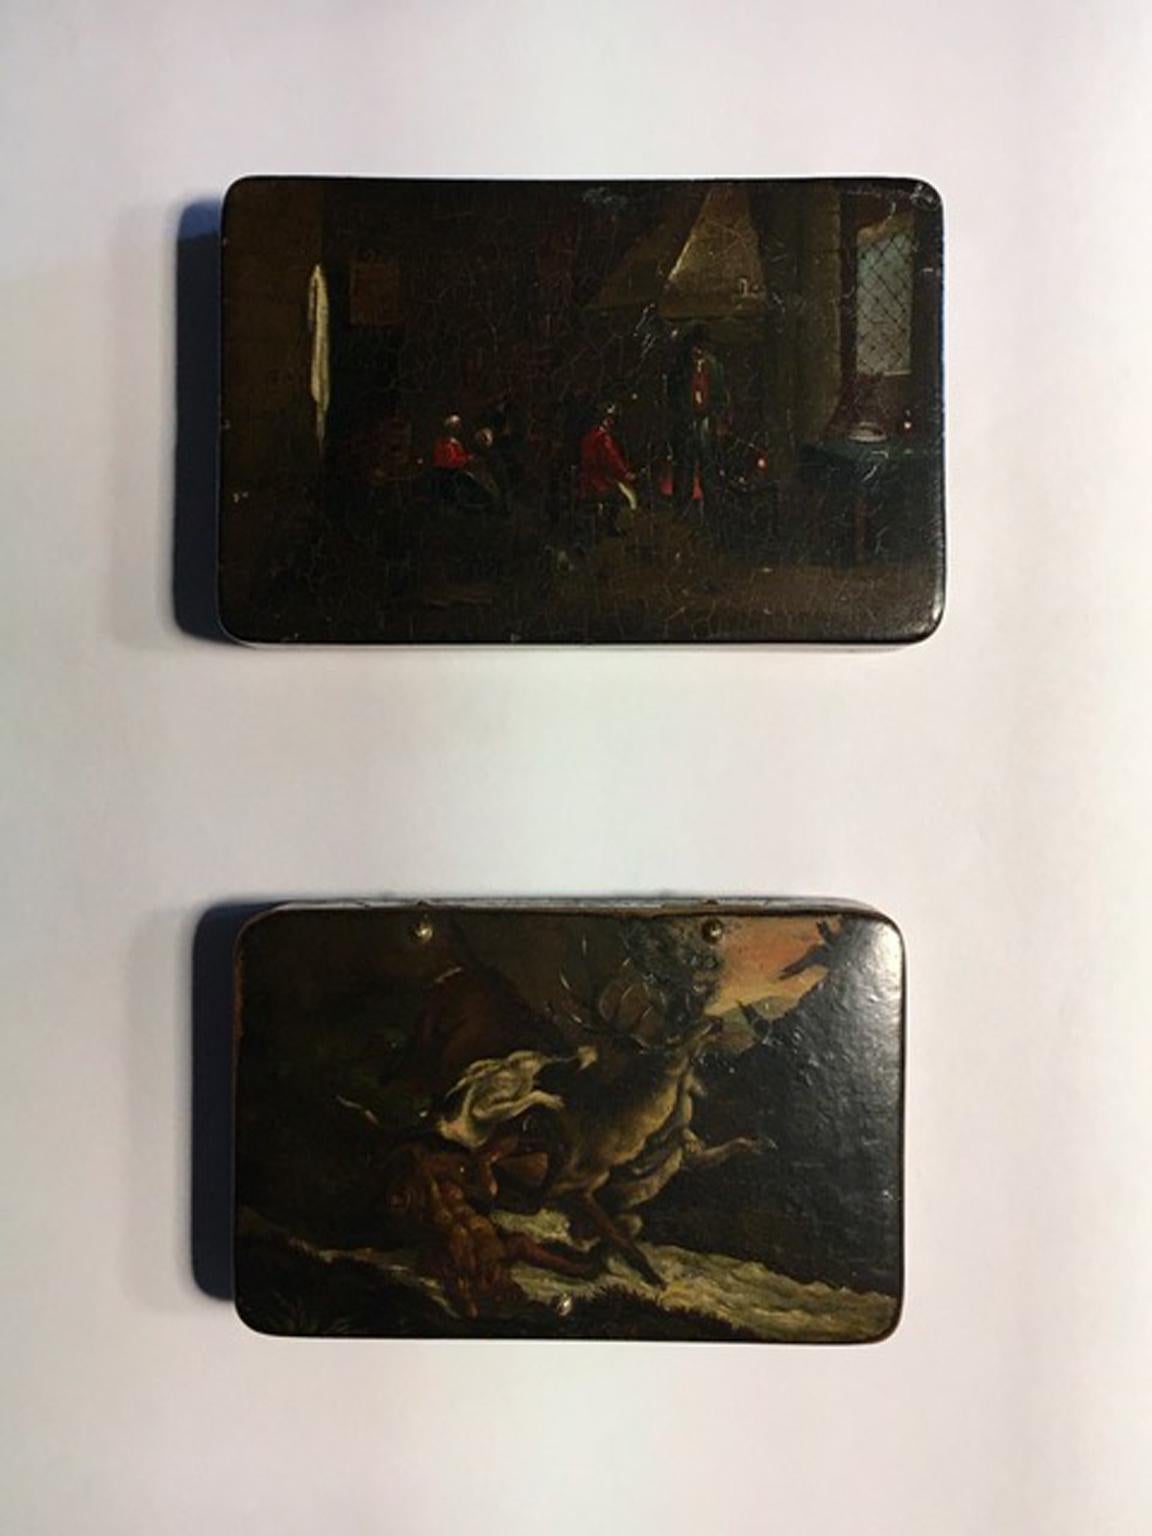 These fine wood lacquered wood boxes are in Flemish style; the cover are hand painted with a natural landscape, so fine as Flemish painting can be. The other one has an home interior scene, with the hunters dressed in red.

These pieces could be